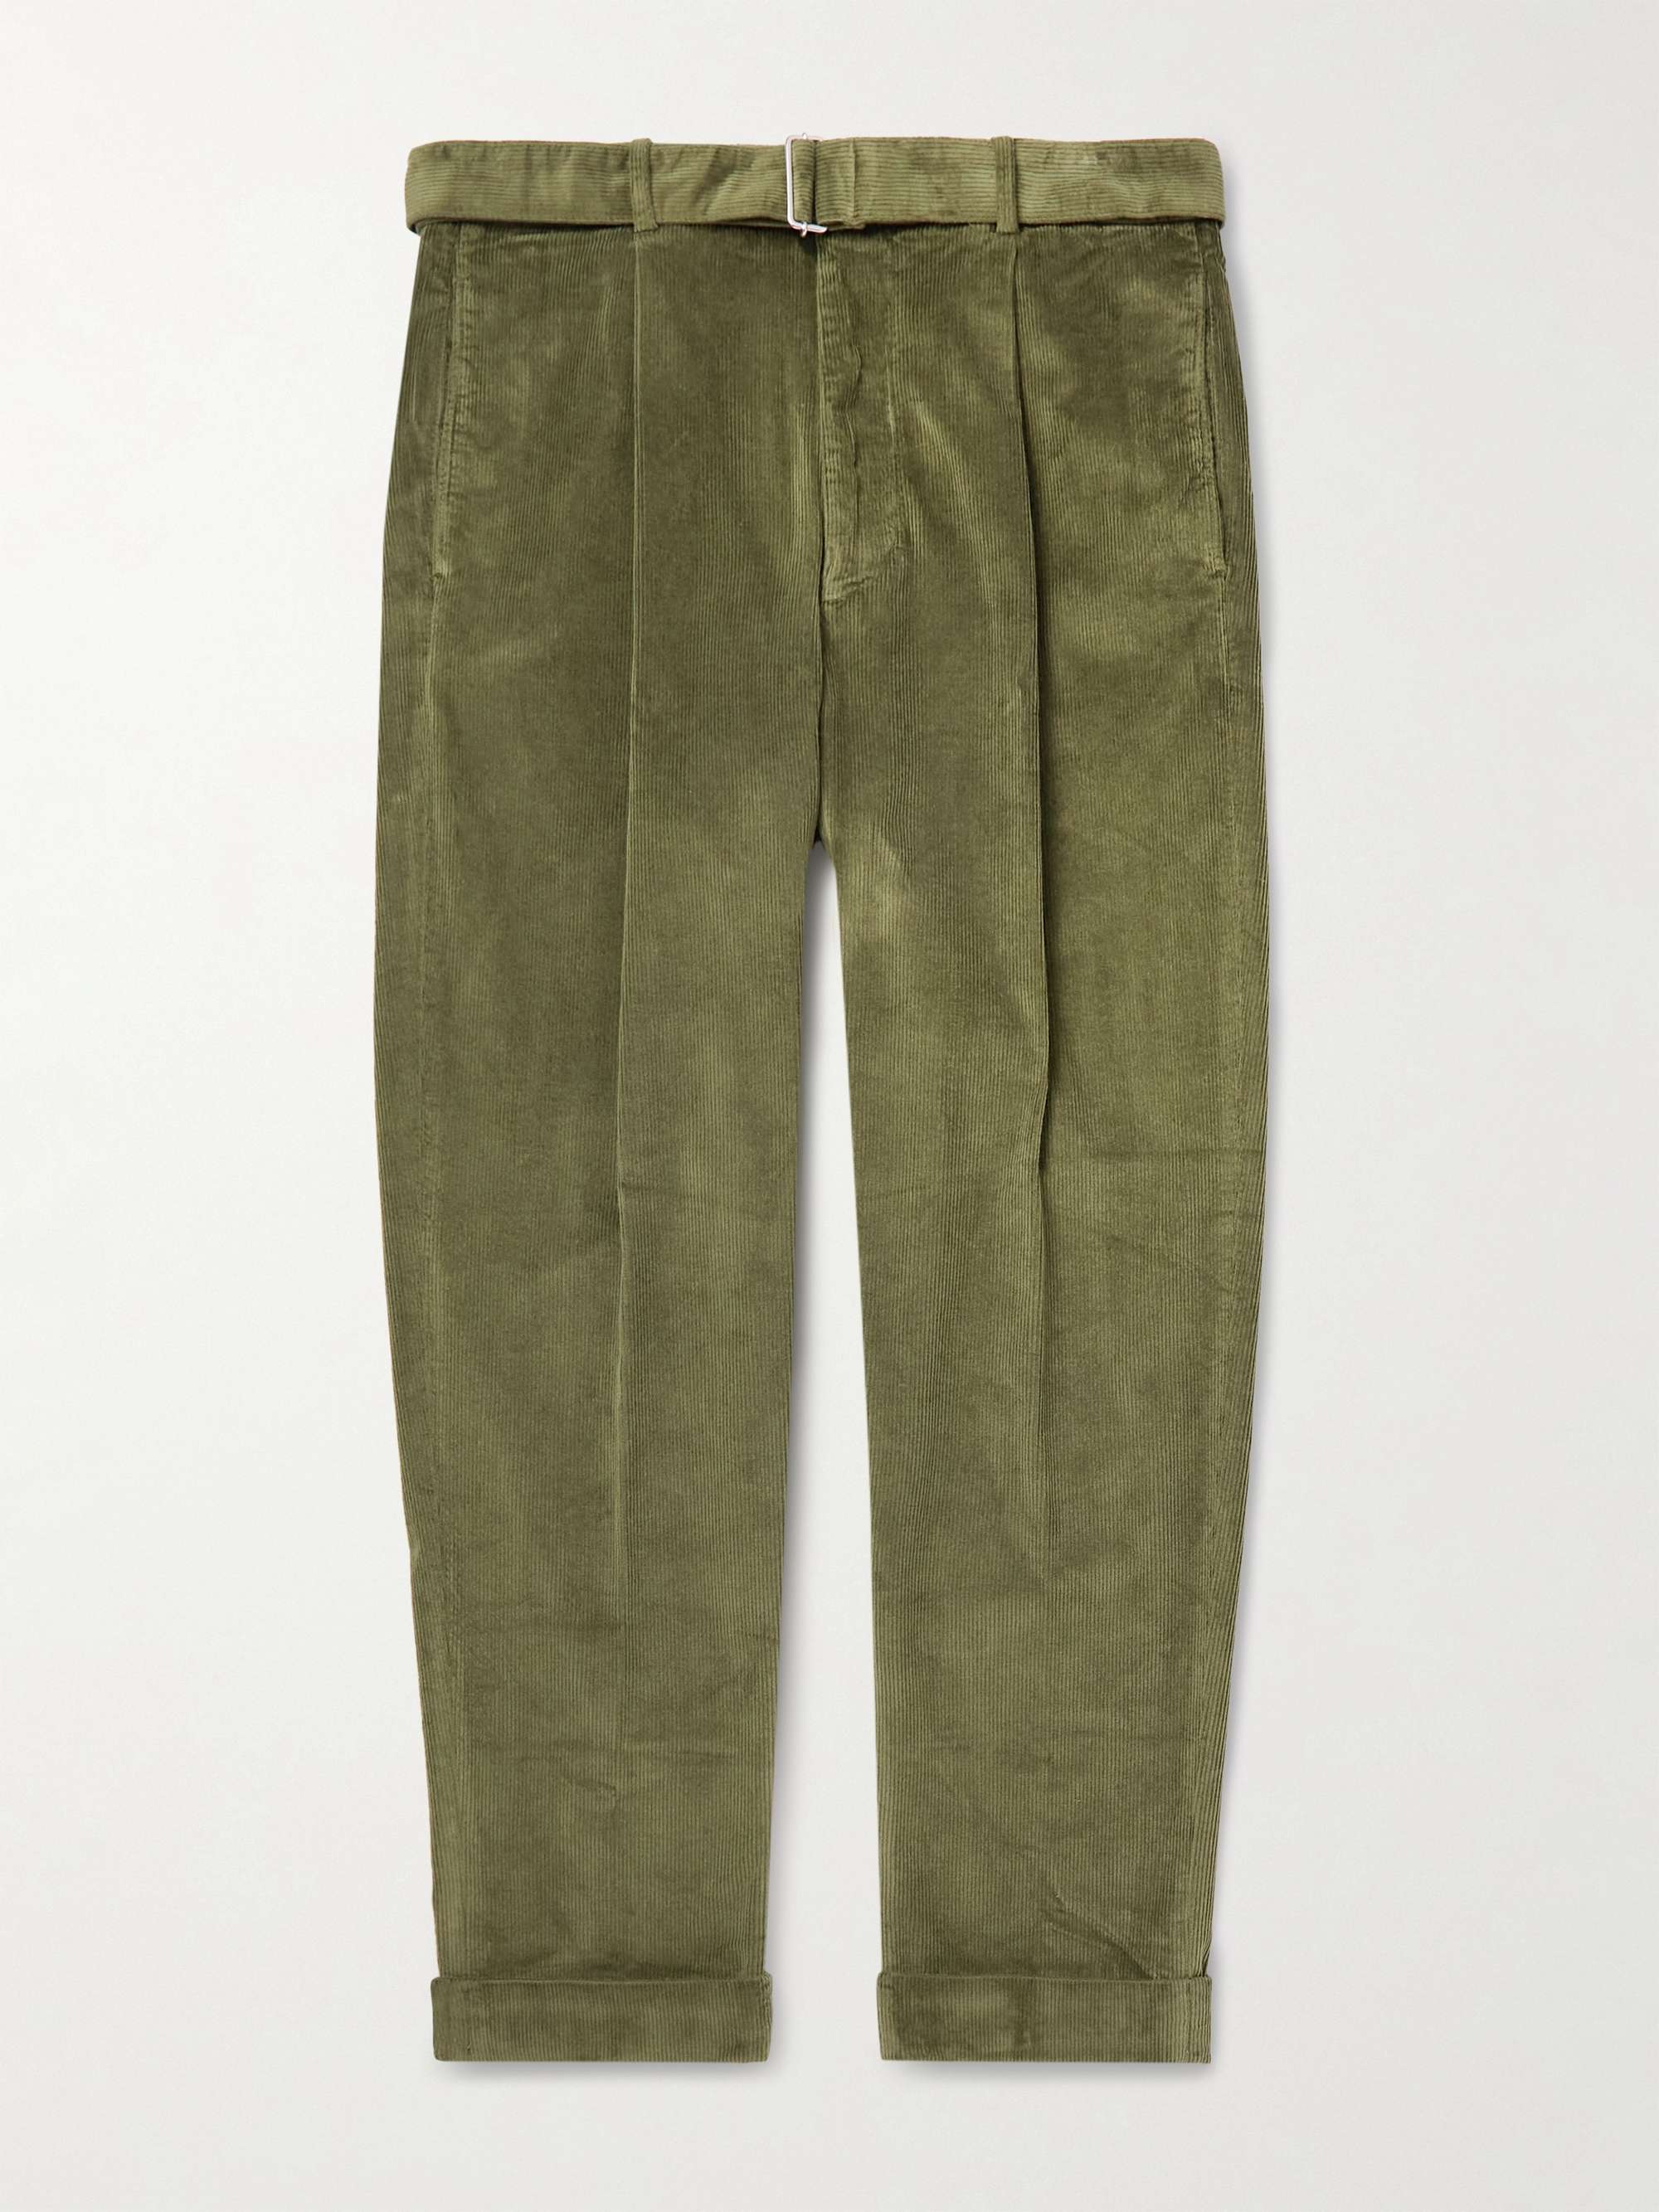 OFFICINE GÉNÉRALE Hugo Tapered Belted Pleated Cotton and Modal-Blend Corduroy Trousers